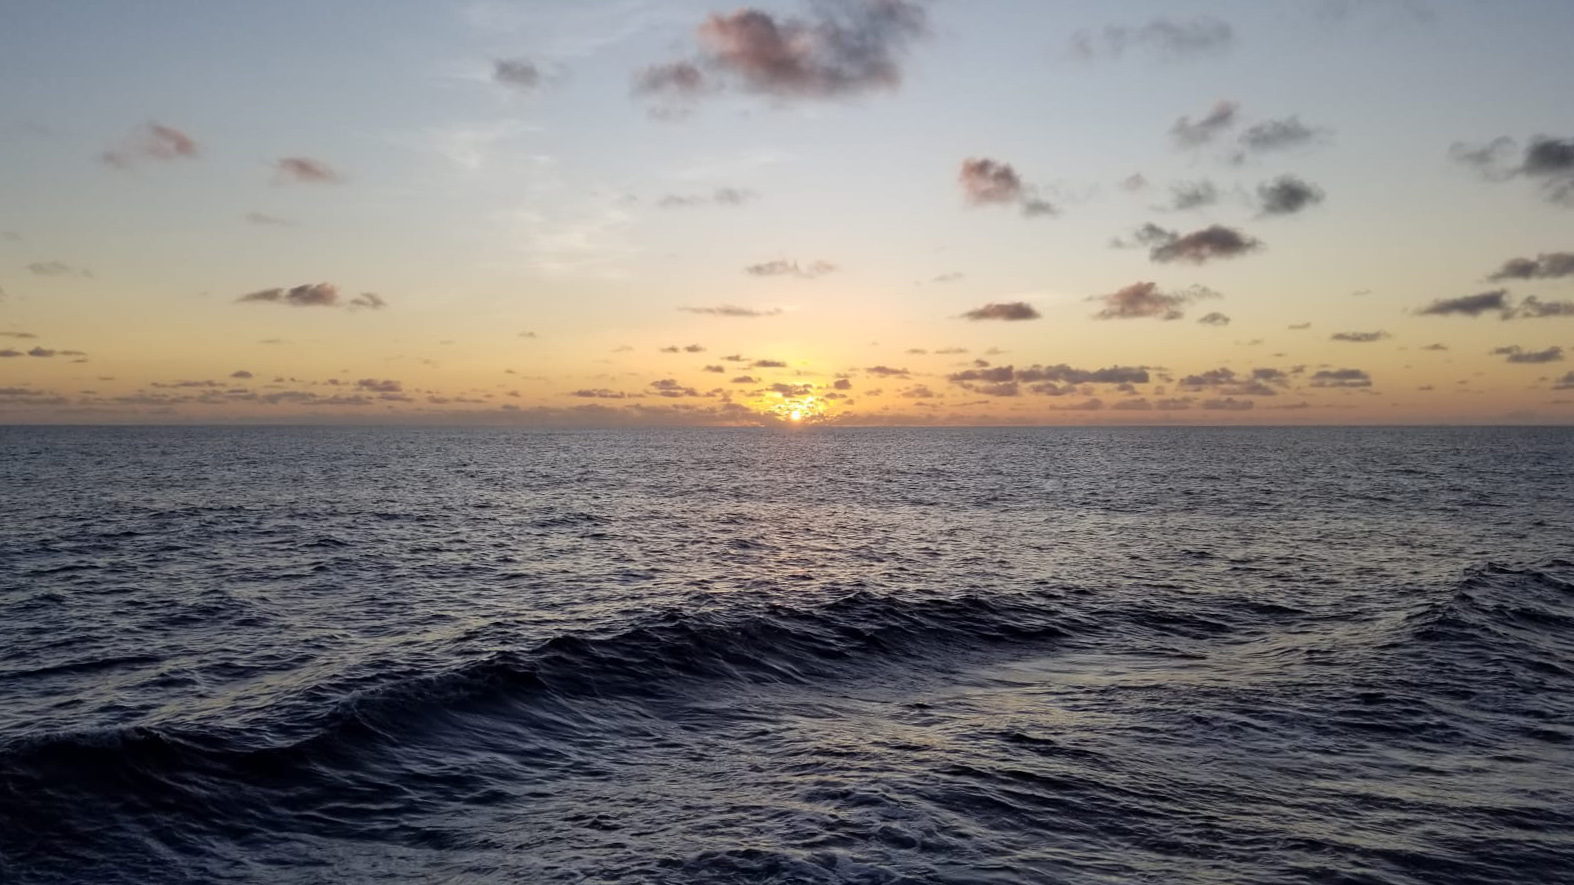 Sunrise at sea with some rolling waves, earning us a “turbulent” journey. Photo by Sidney Wayne.